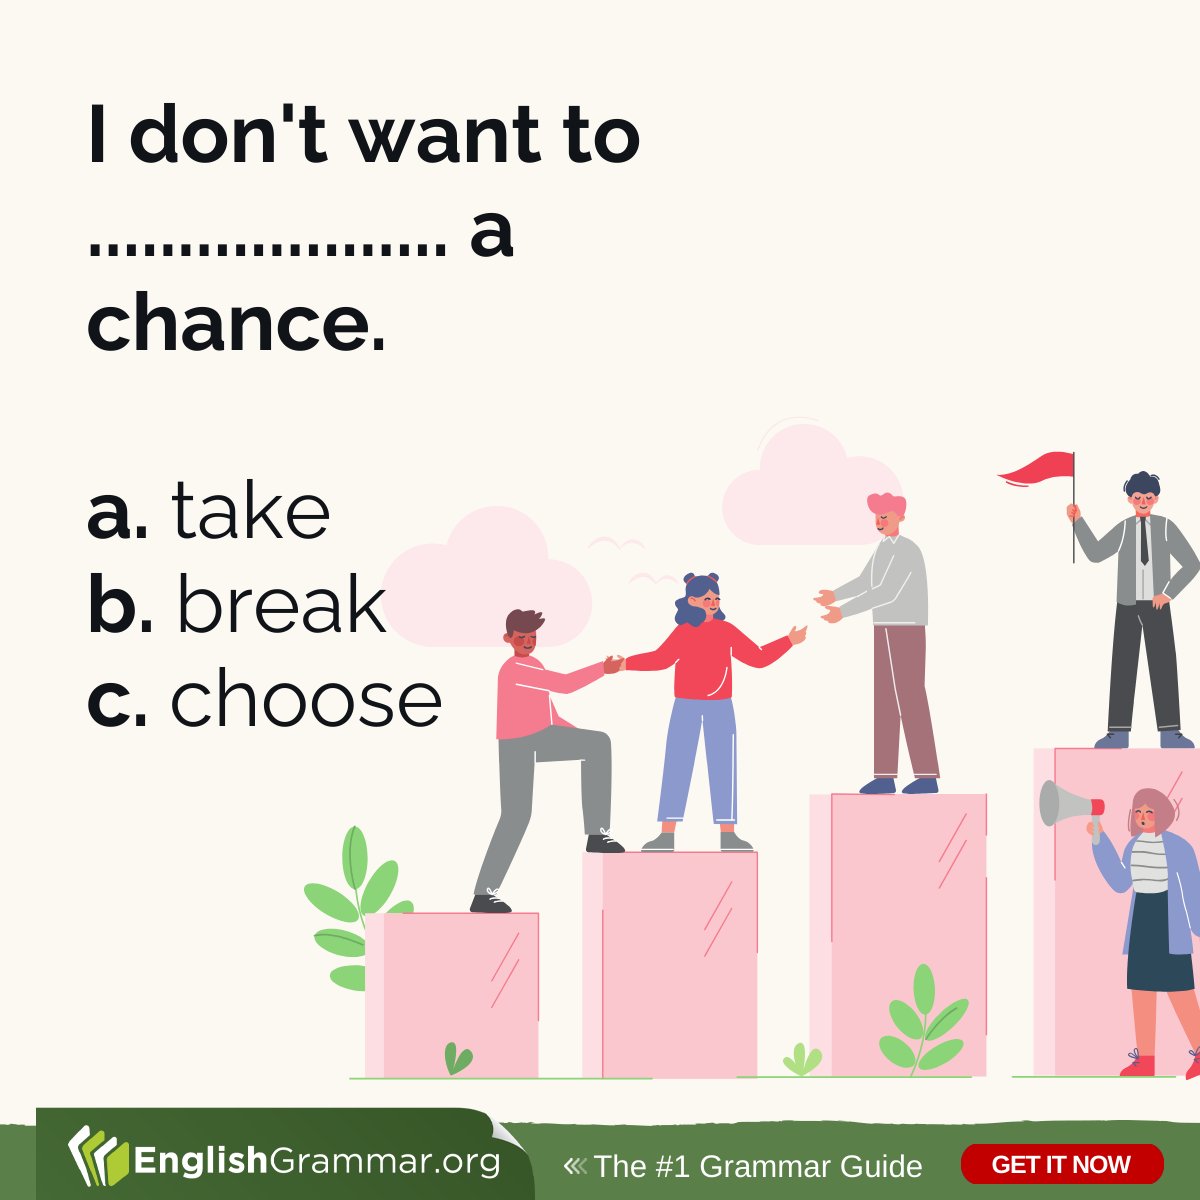 Anyone? Find the right answer here: englishgrammar.org/collocations-w… #grammar #amwriting #writing